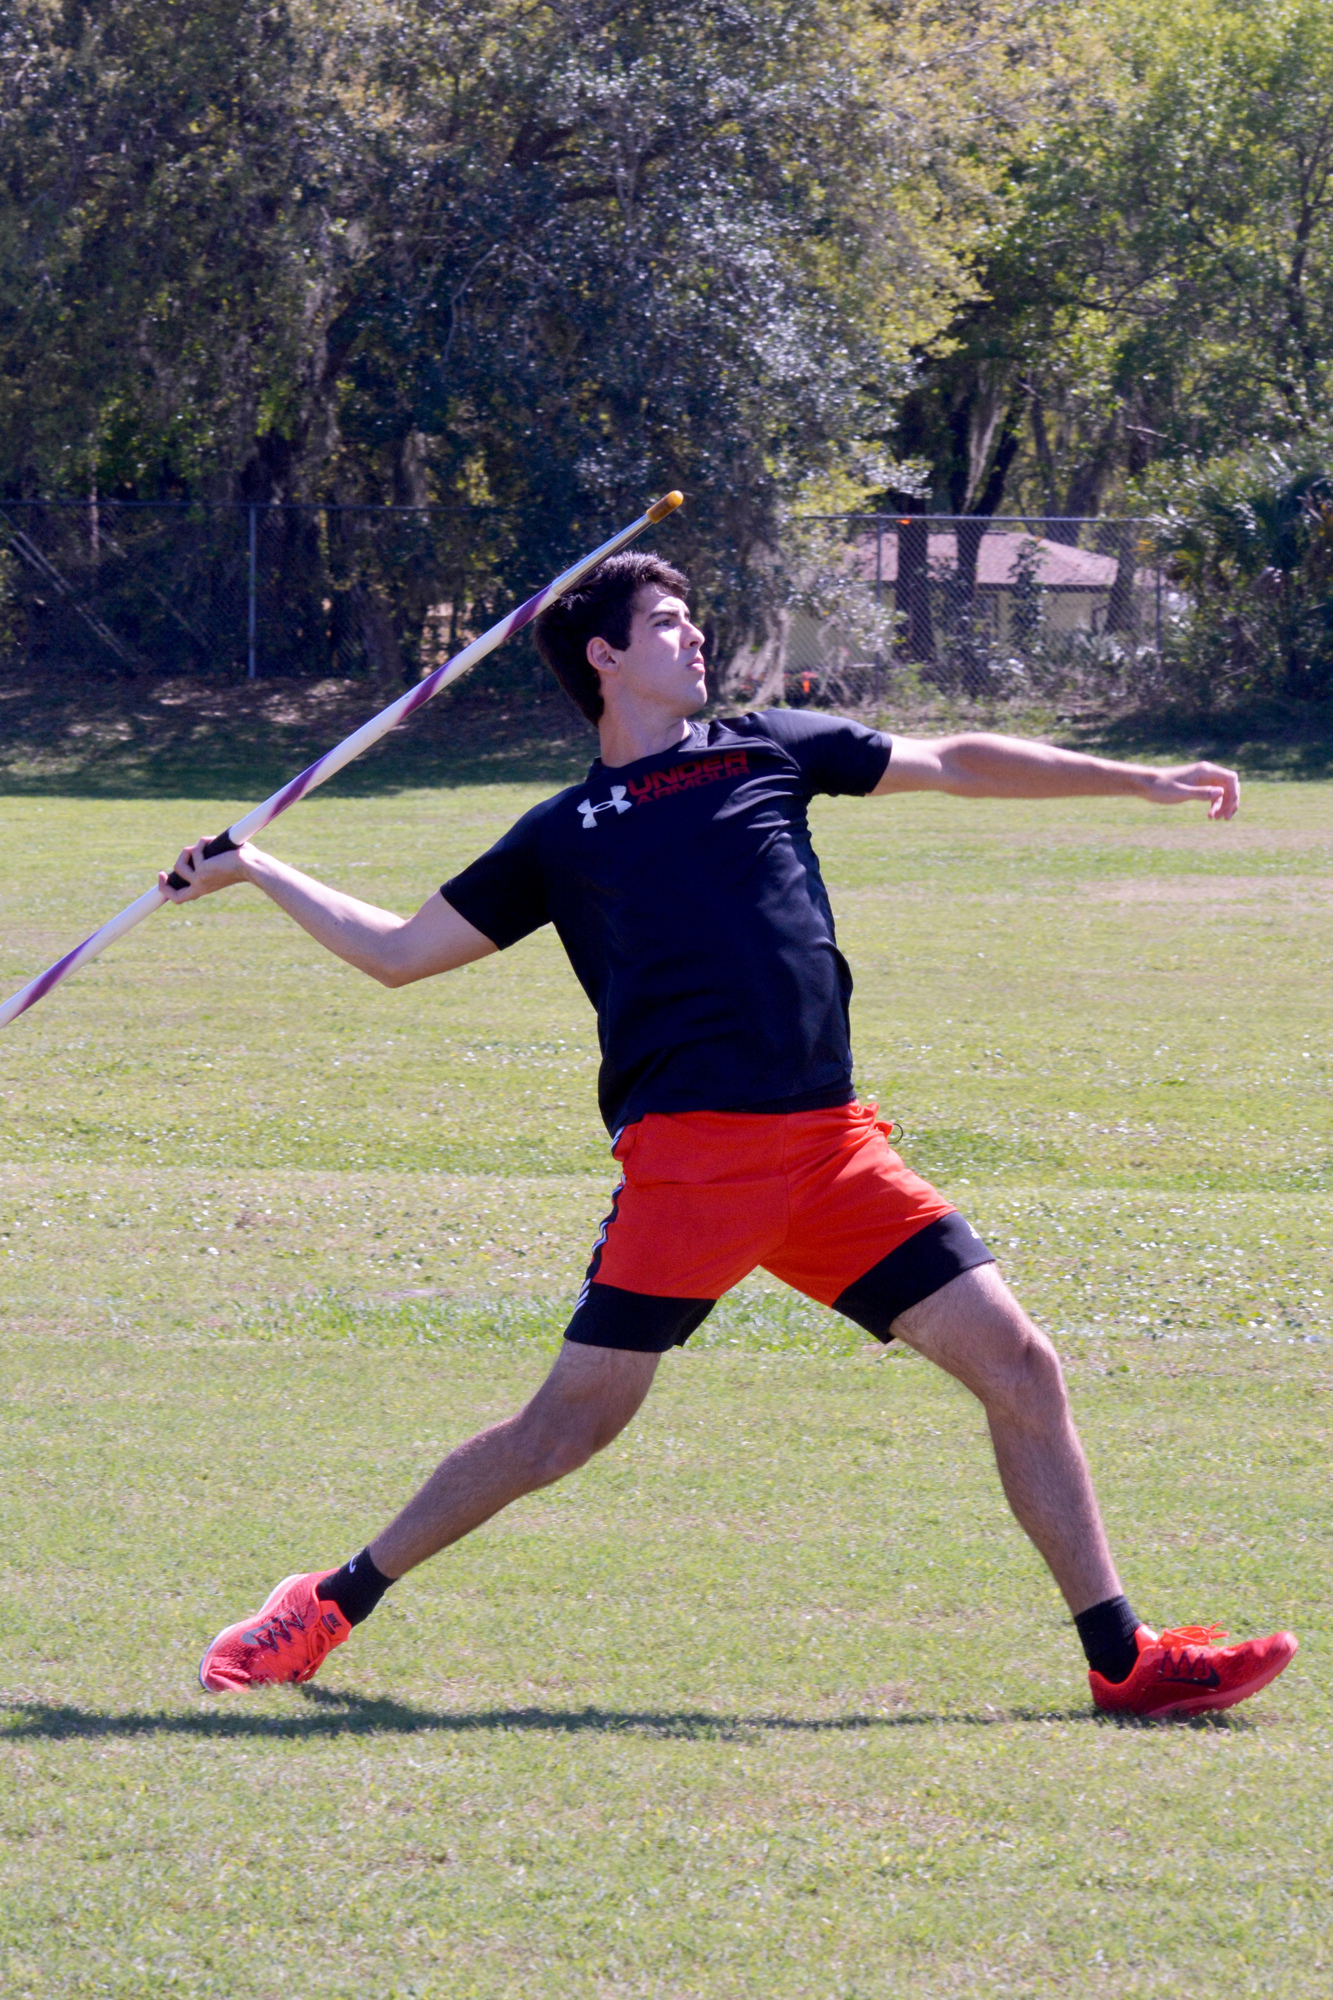 Lakewood Ranch's Blake Wood won the javelin at the 2021 Ram Invitational with a toss of 157 feet, six inches.